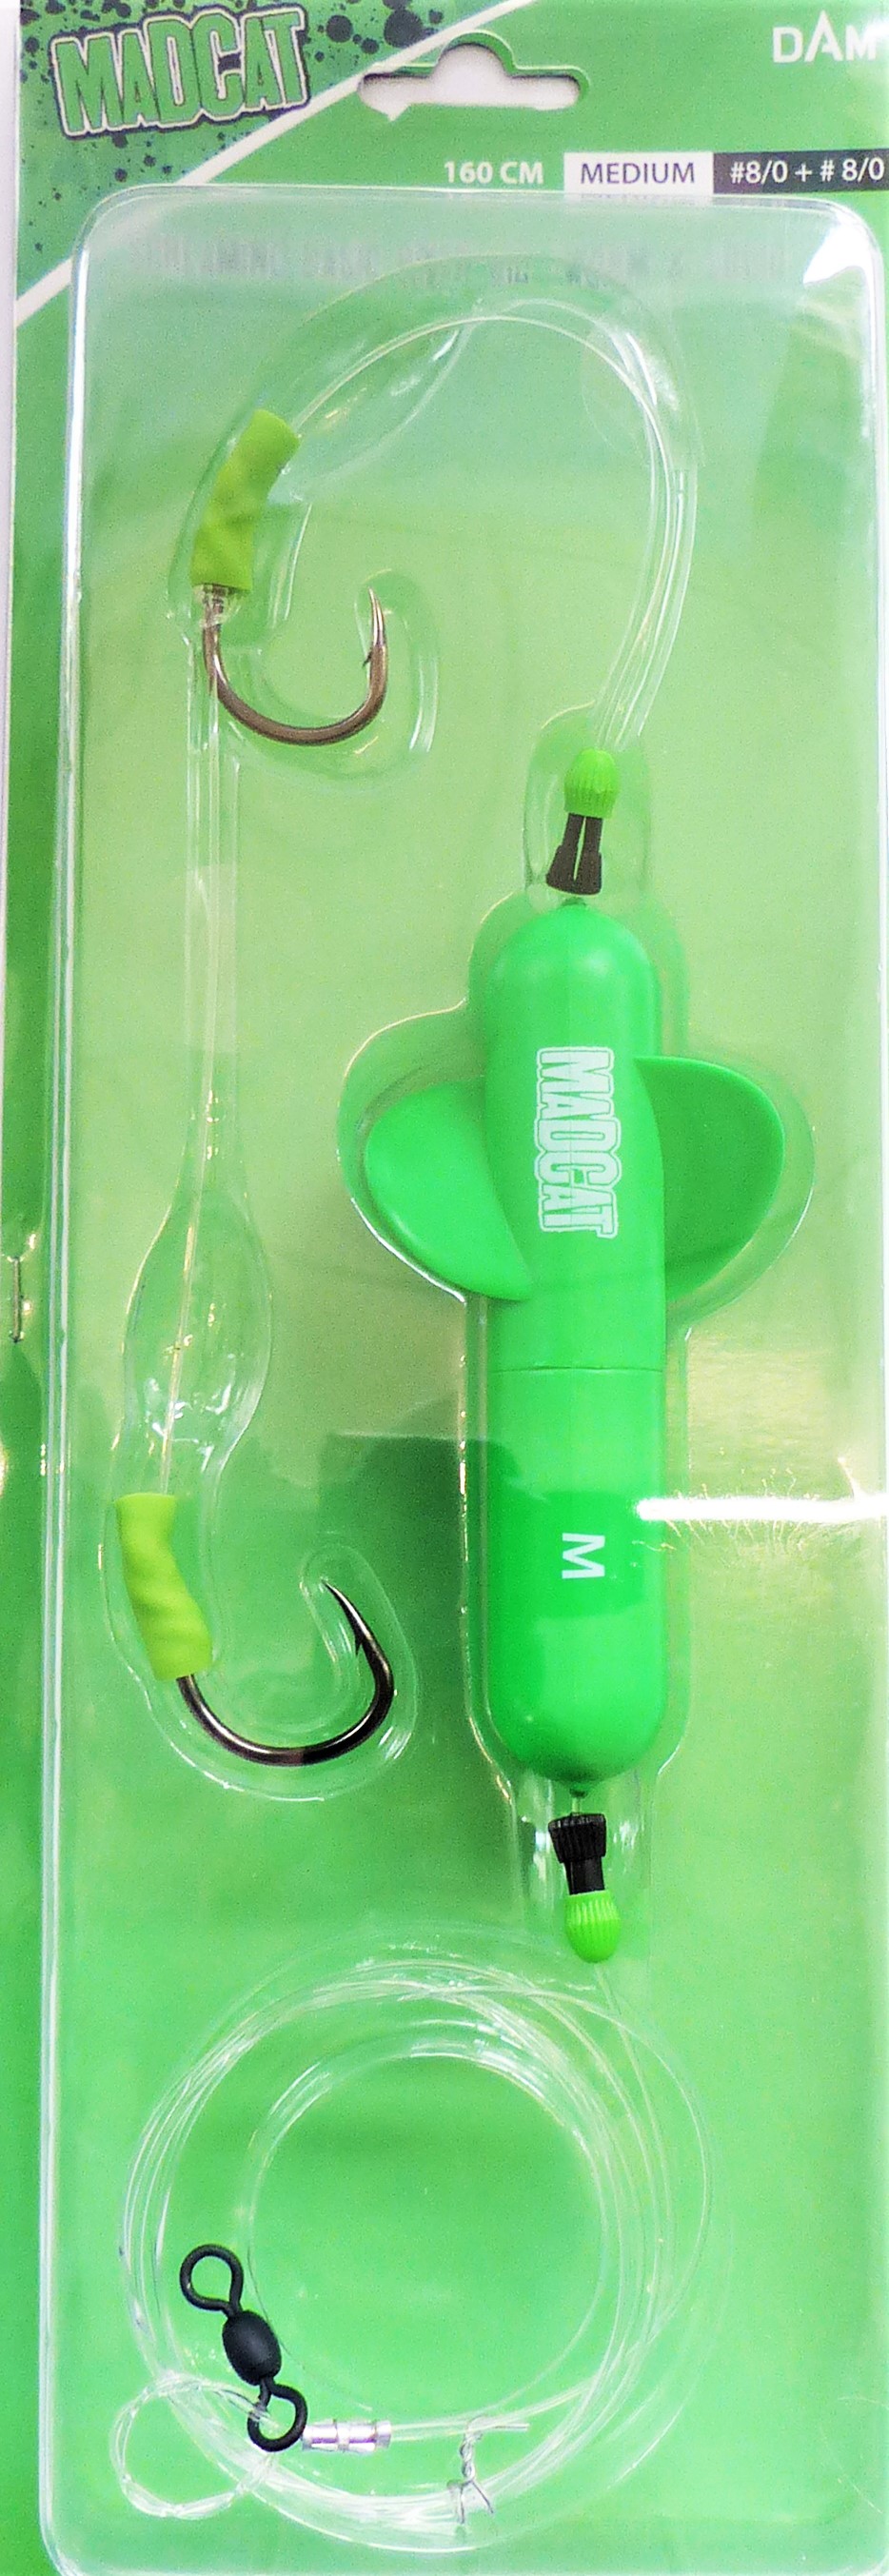  MADCAT SCREAMING Basic River Rig Worm & Squid Gr. M